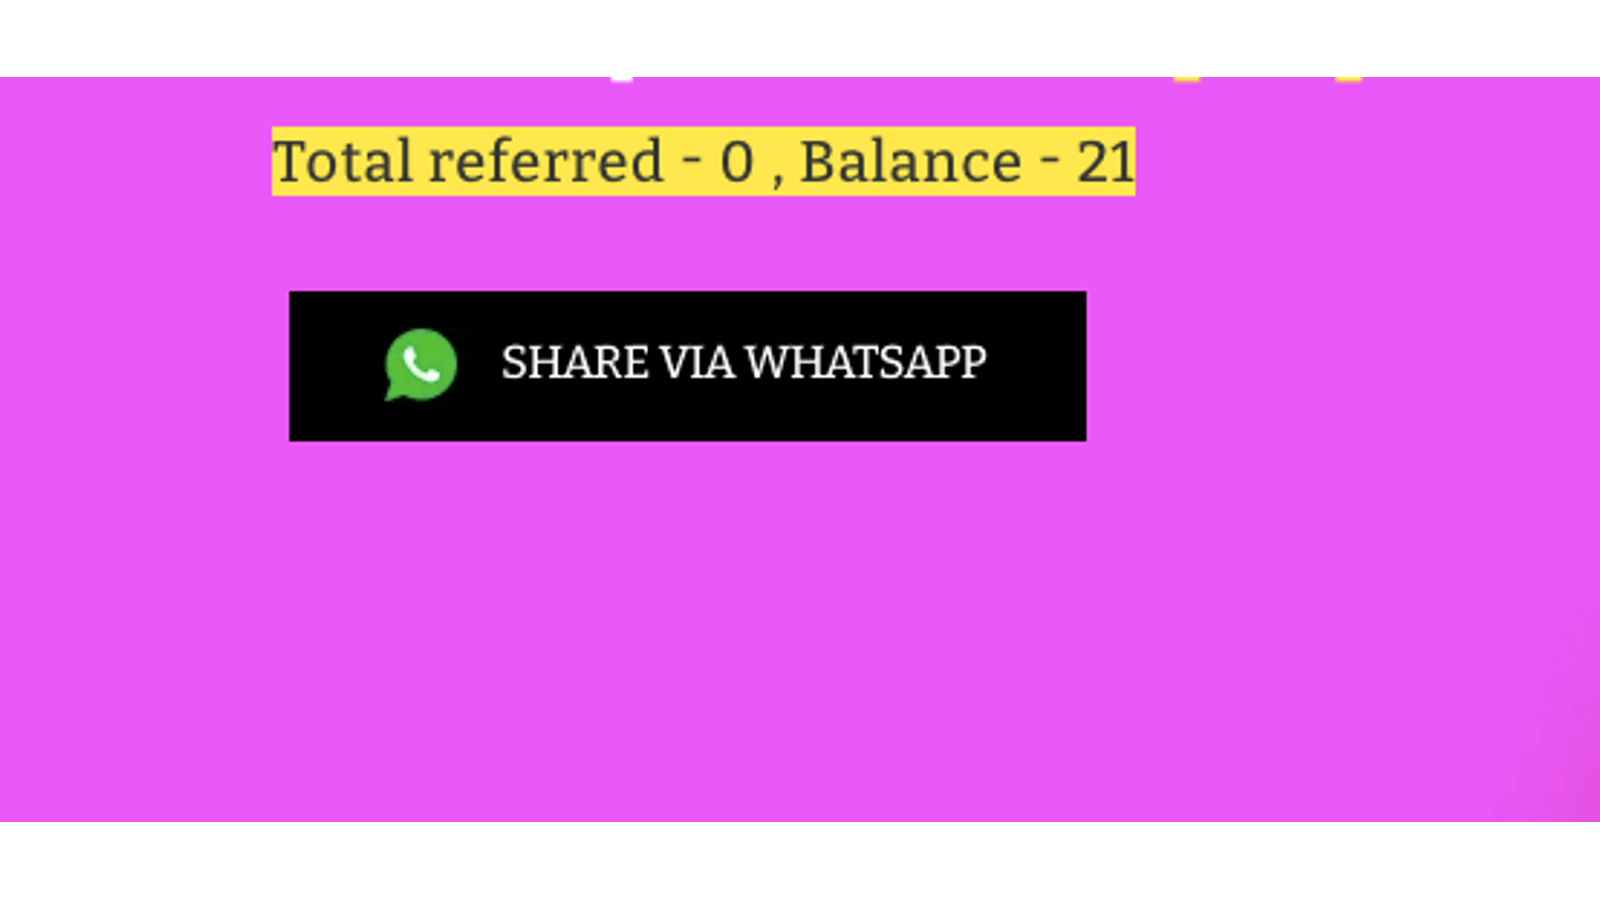 customer page showing referral code and code to share.